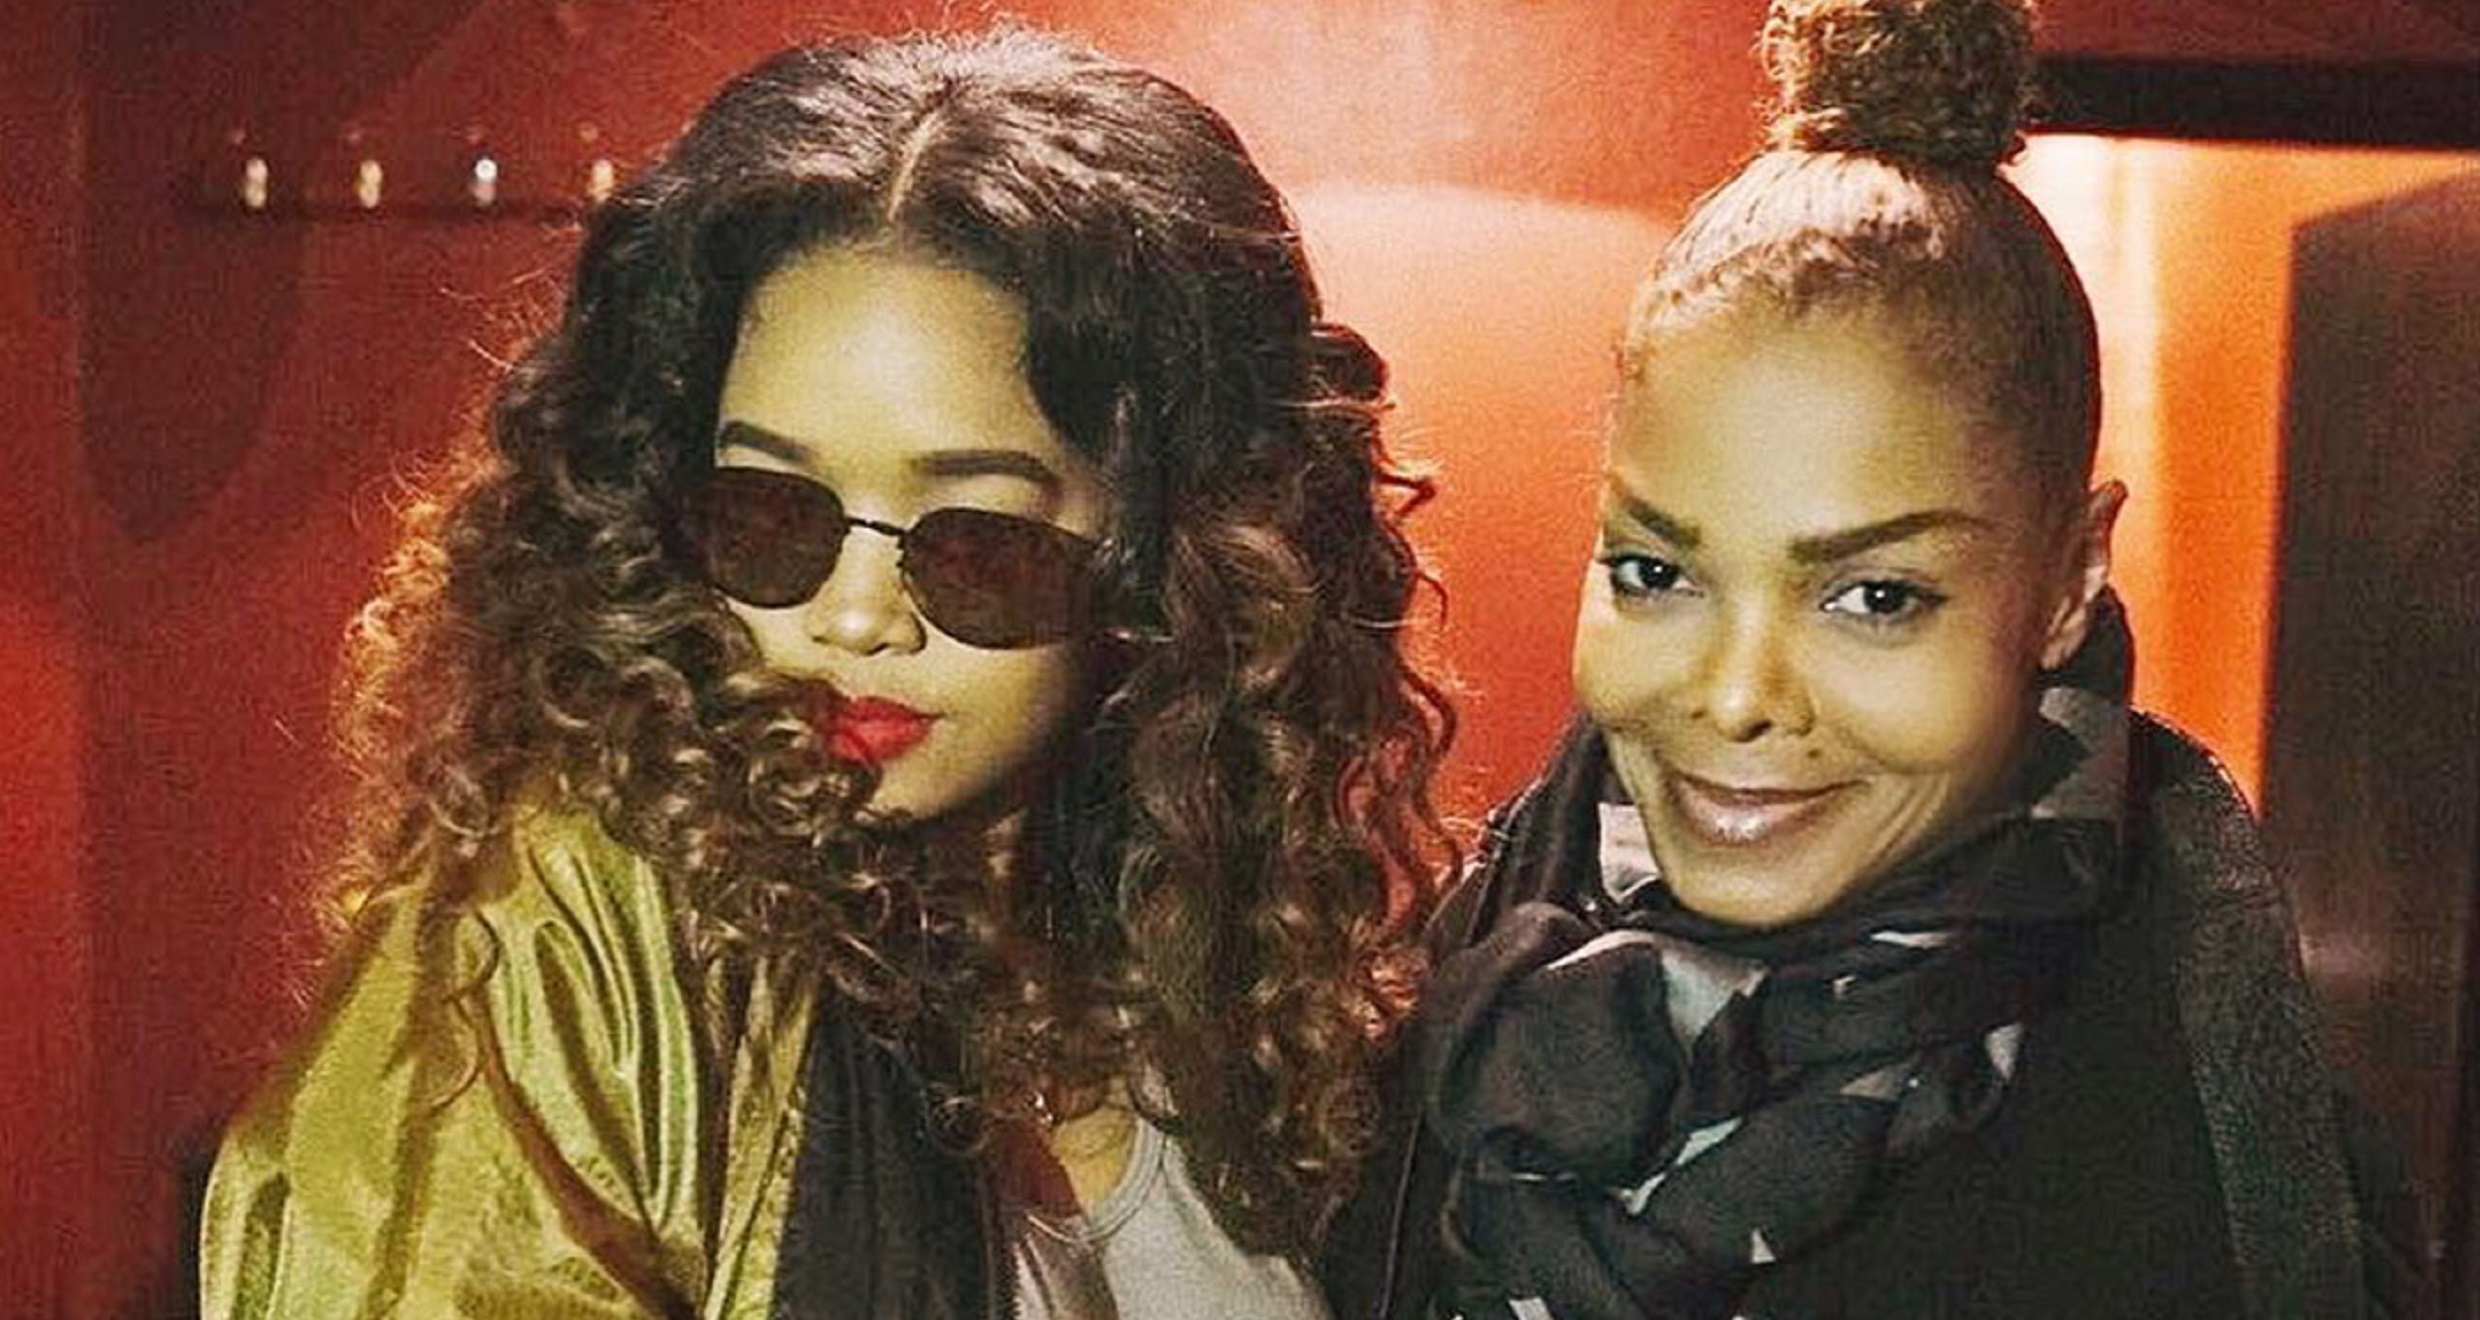 Janet Jackson Gave a Shoutout To H.E.R. After Oscar Win – “Keepin it strong for the girls”